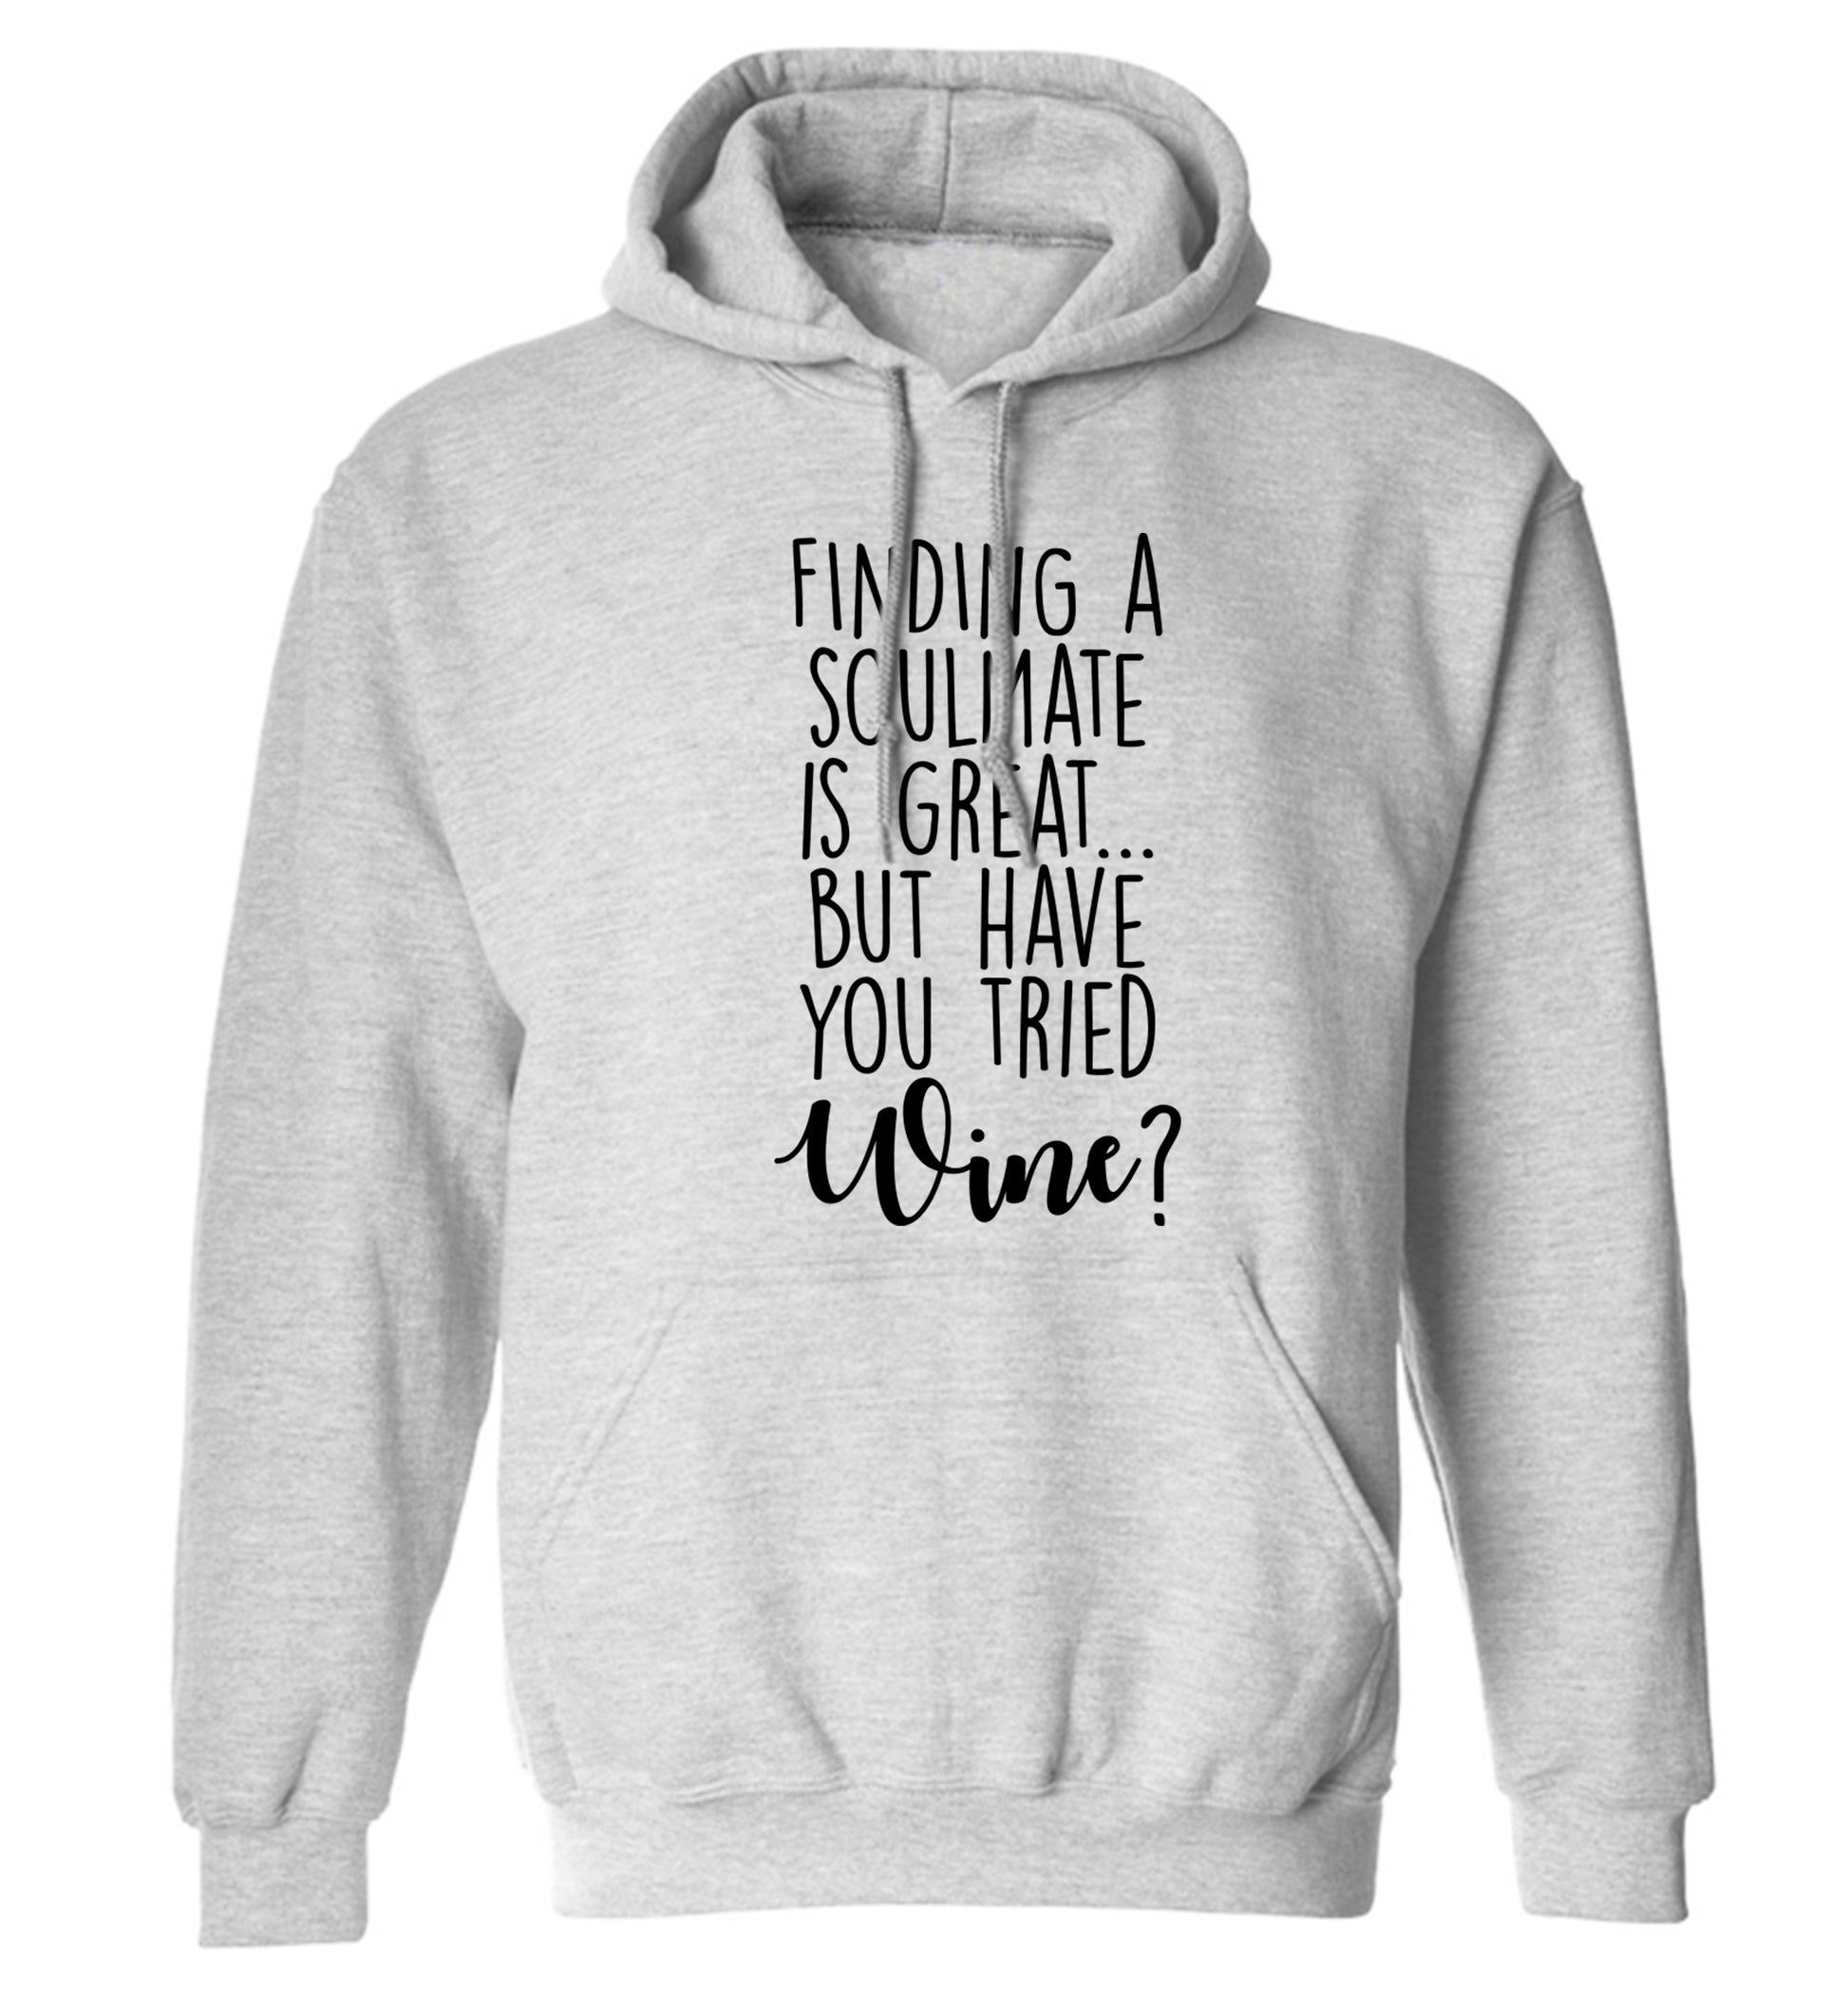 Finding a soulmate is great but have you tried wine? adults unisex grey hoodie 2XL